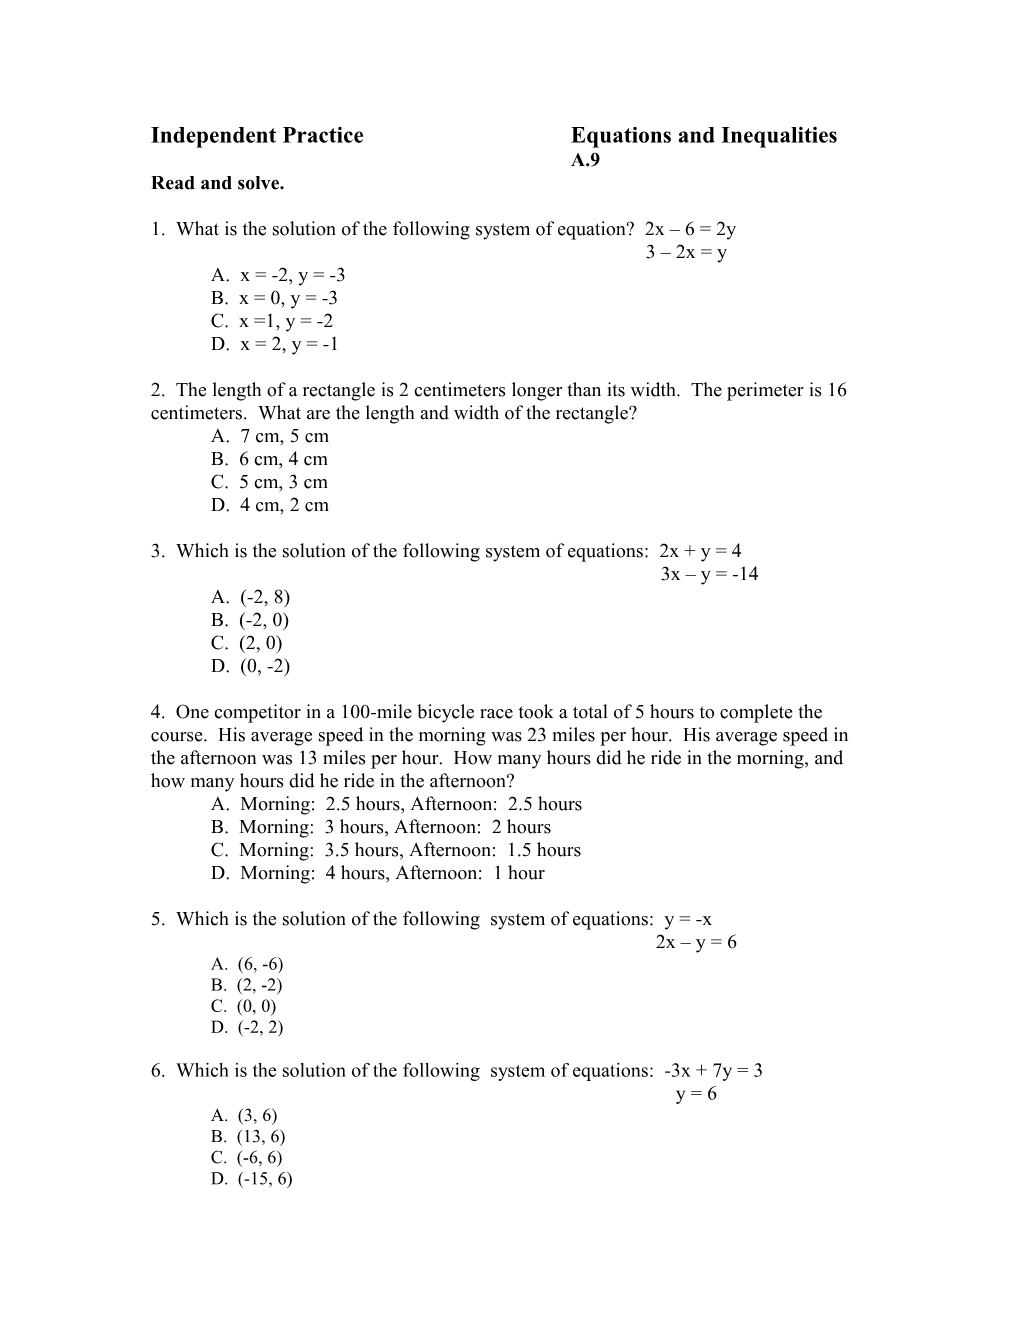 Independent Practice Equations and Inequalities